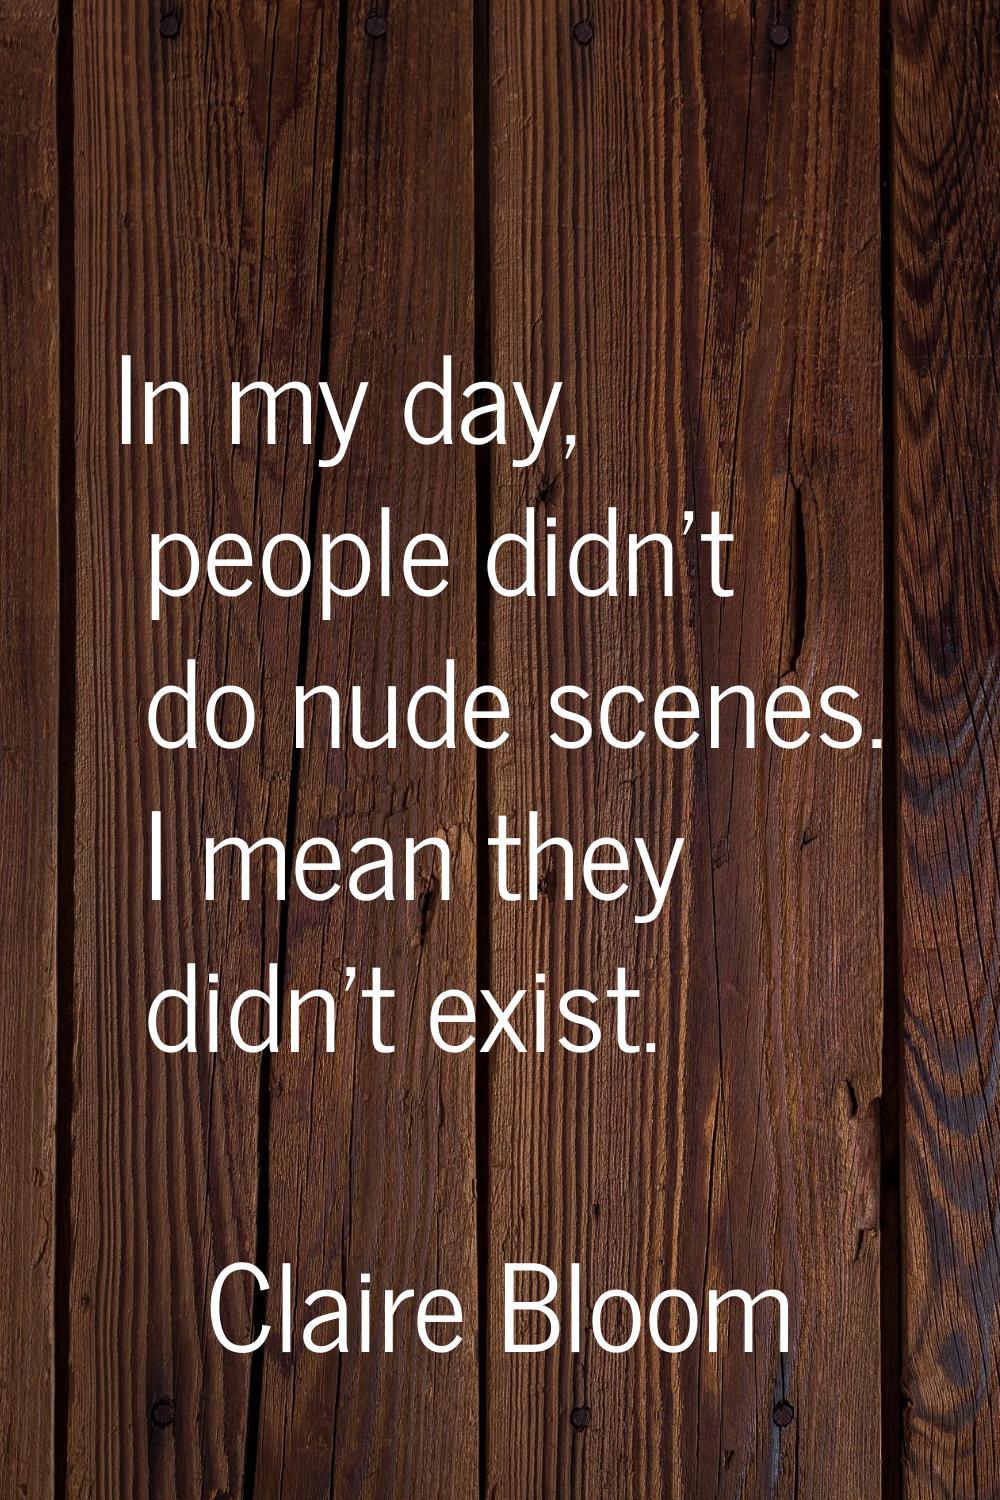 In my day, people didn't do nude scenes. I mean they didn't exist.